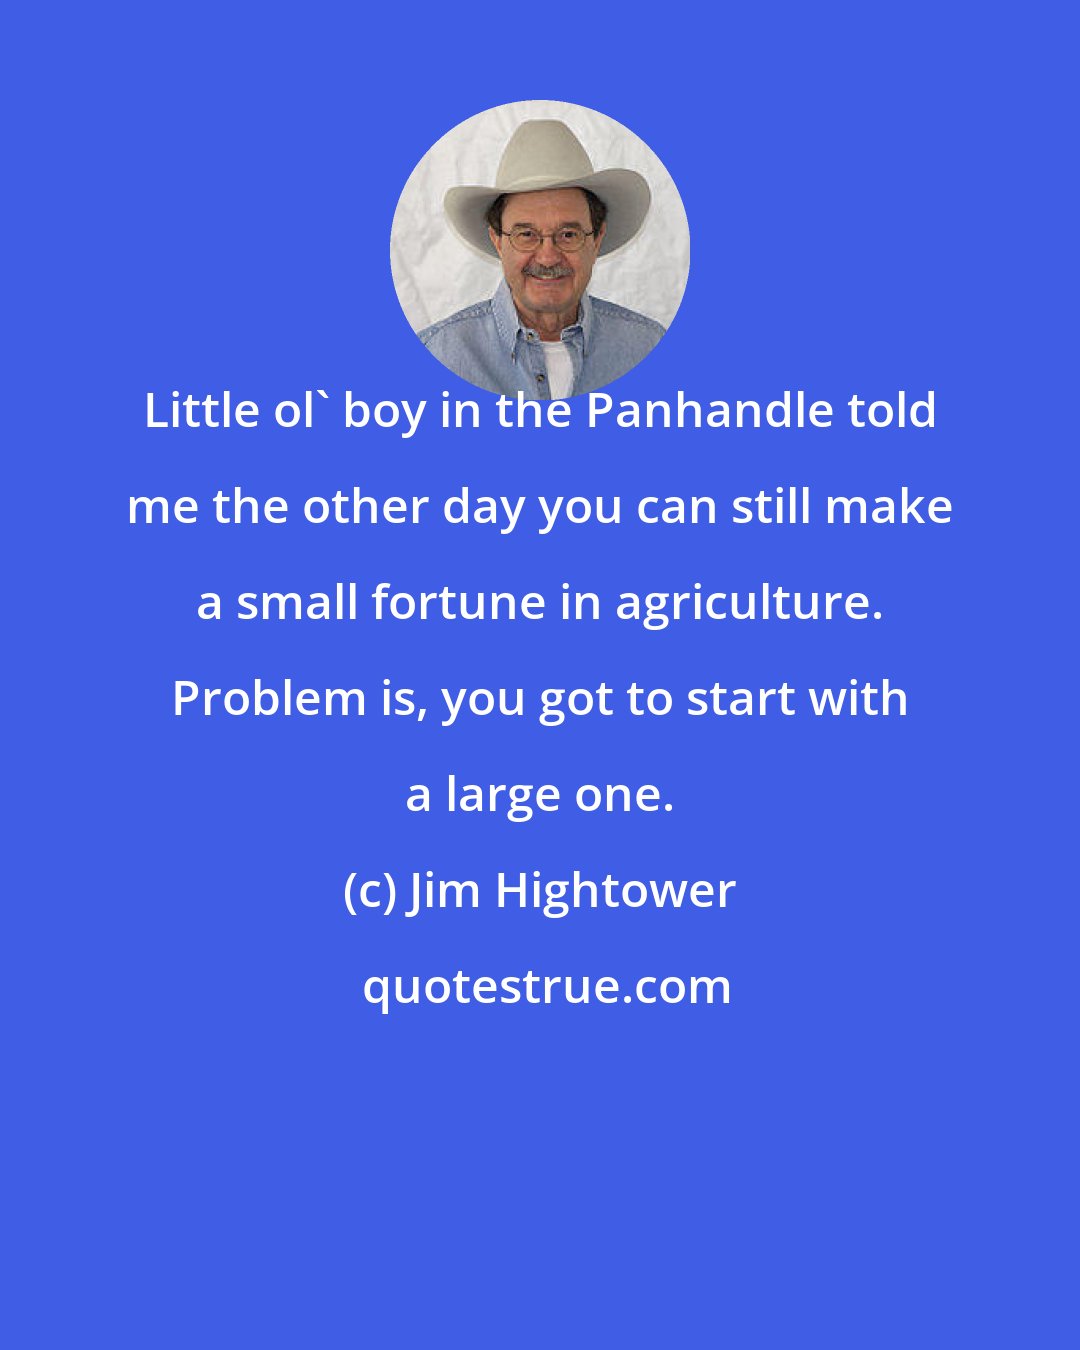 Jim Hightower: Little ol' boy in the Panhandle told me the other day you can still make a small fortune in agriculture. Problem is, you got to start with a large one.